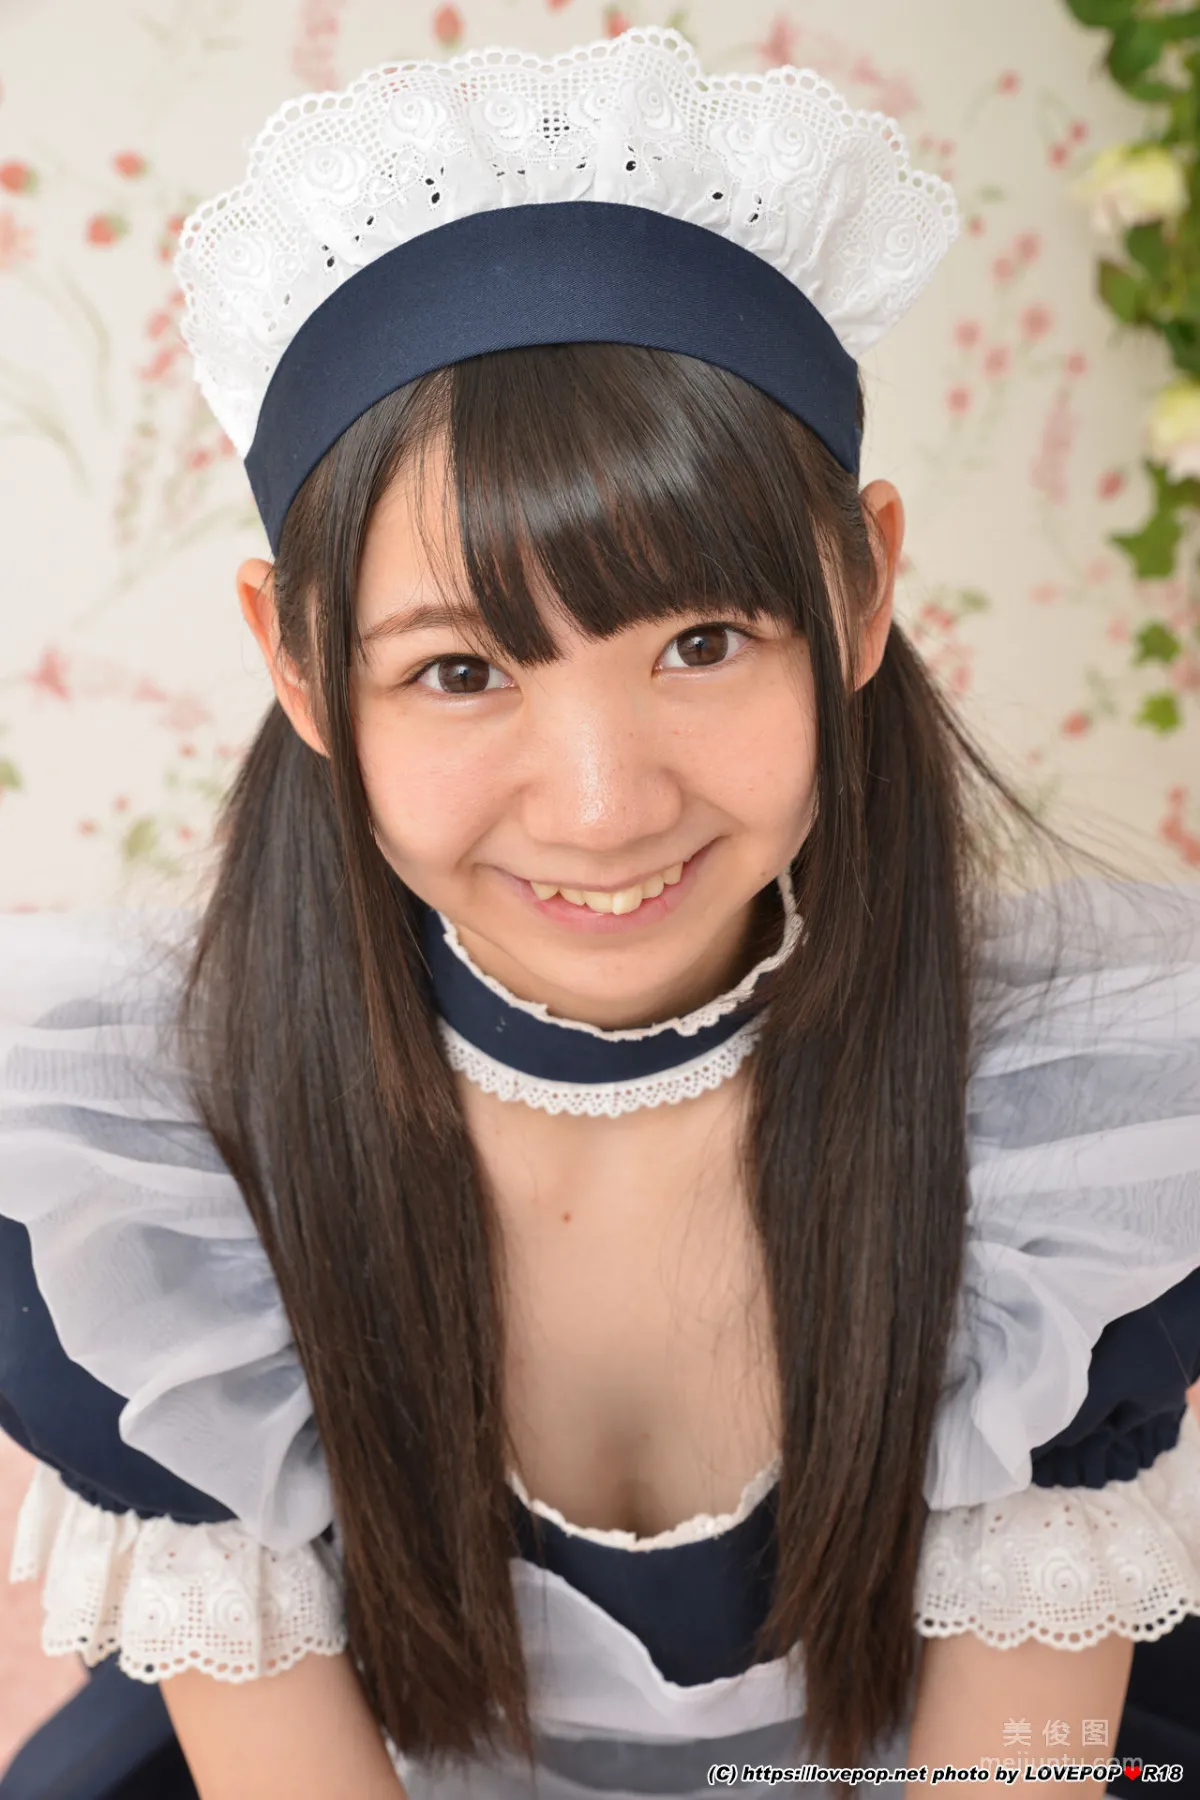 [LOVEPOP] Special Maid Collection - 白井ゆずか Photoset 013